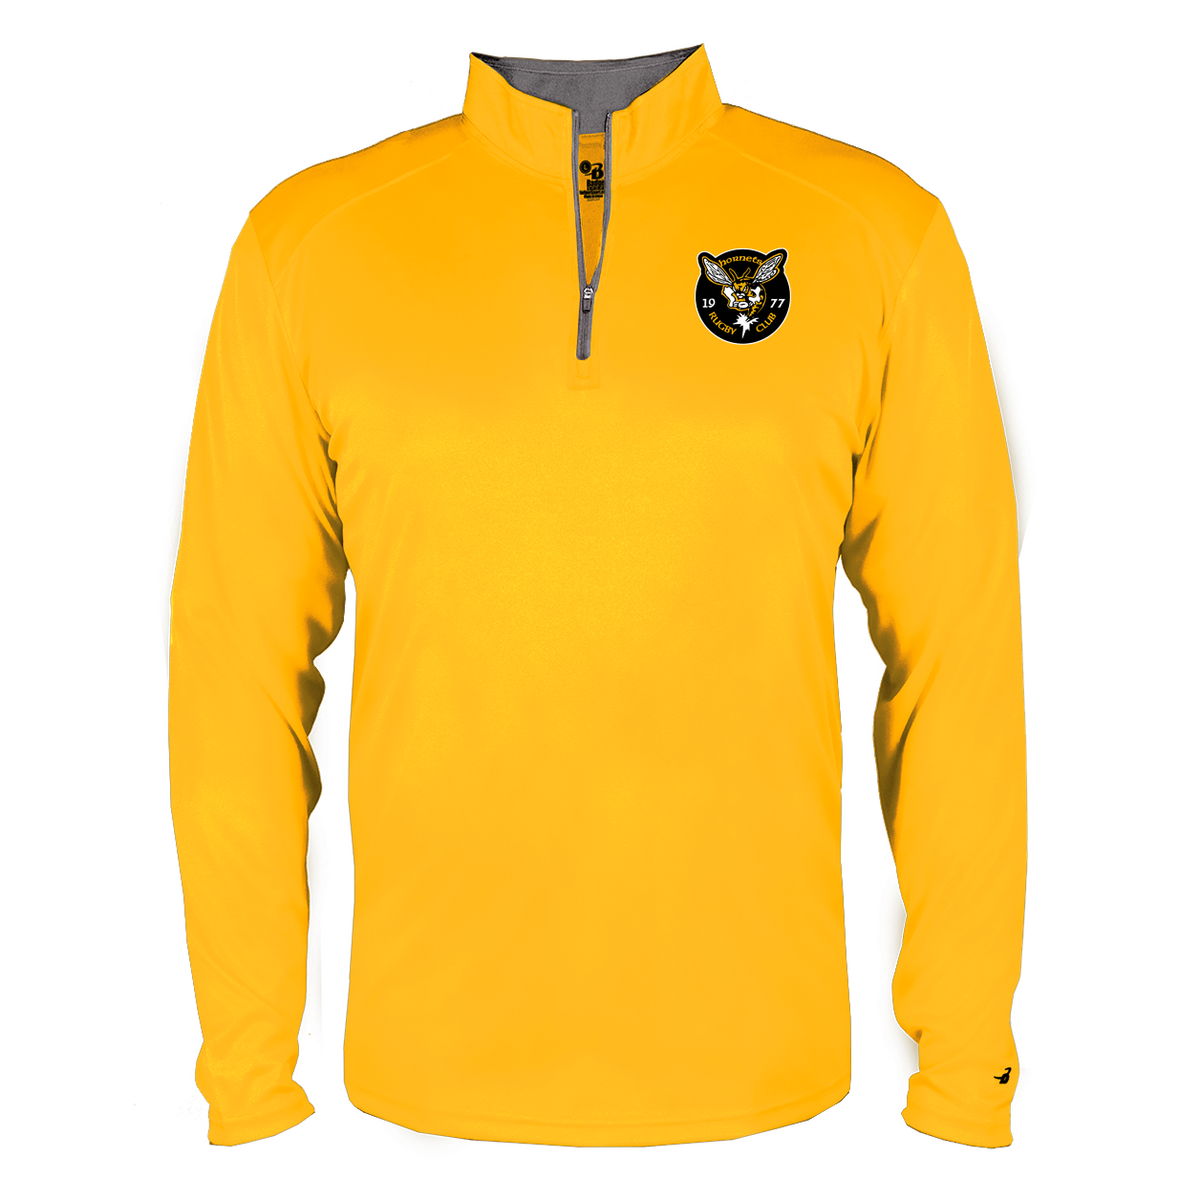 St. Louis Hornets Rugby Club B-Core 1/4 Zip